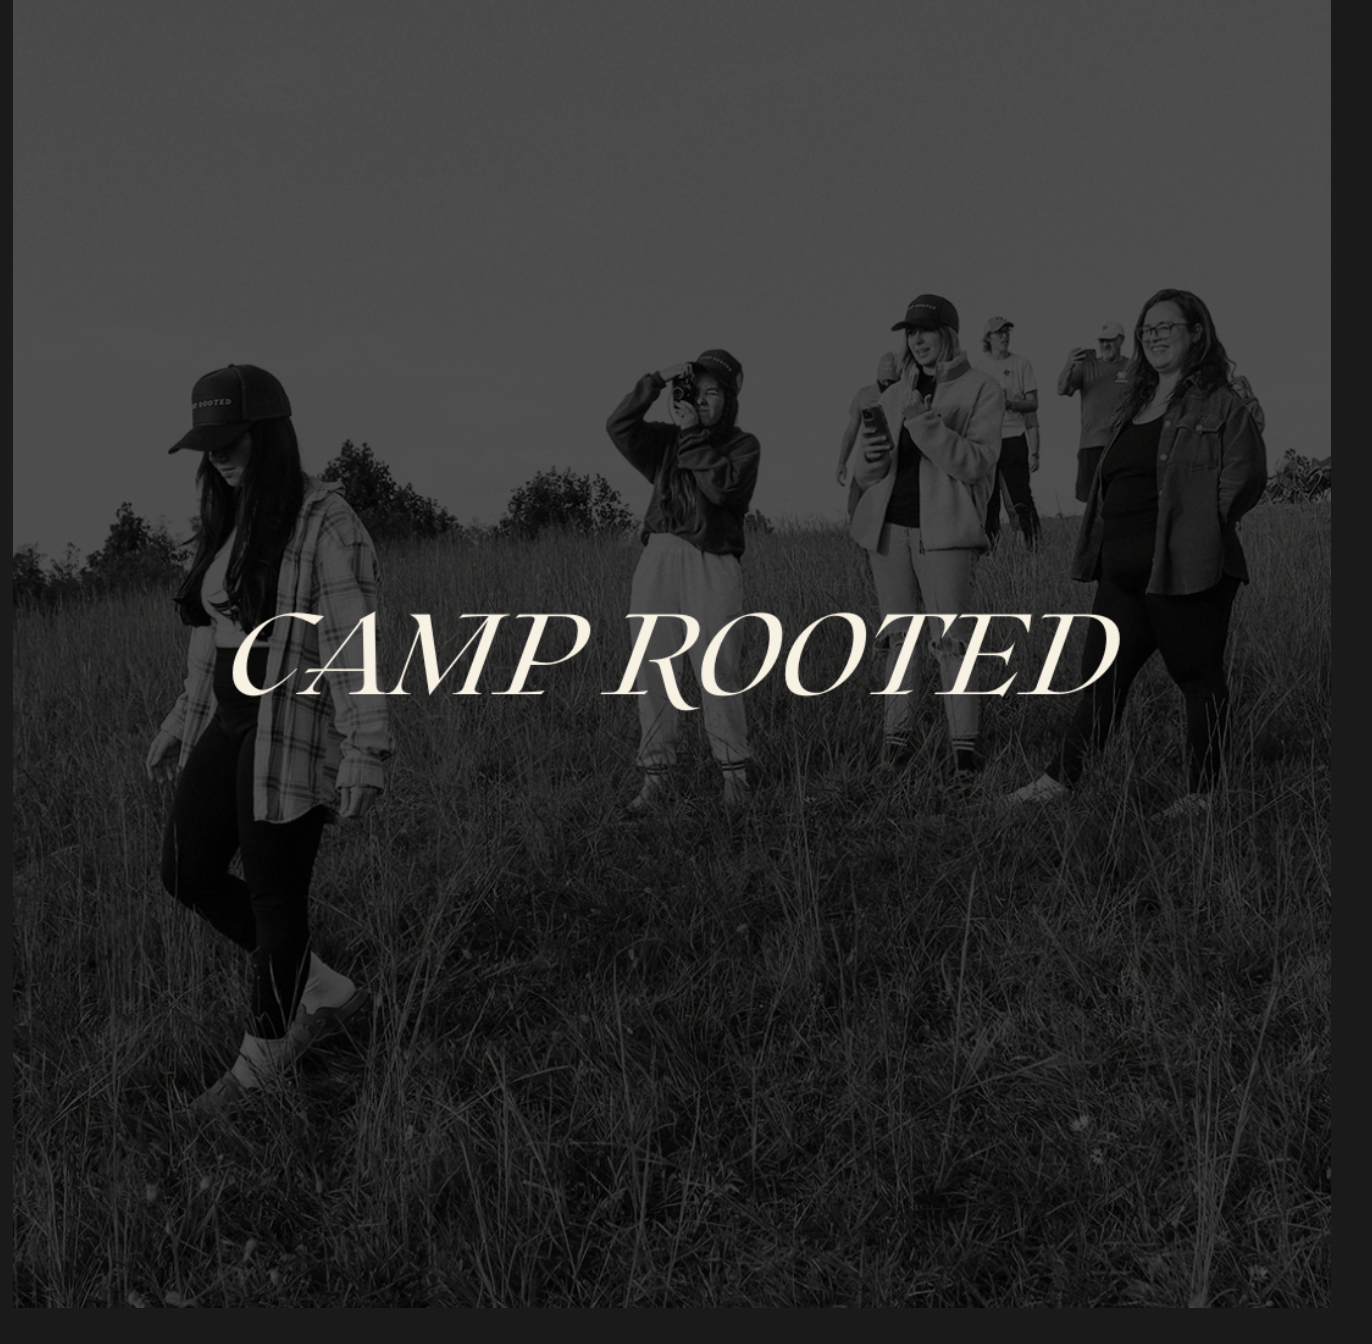 CAMP ROOTED